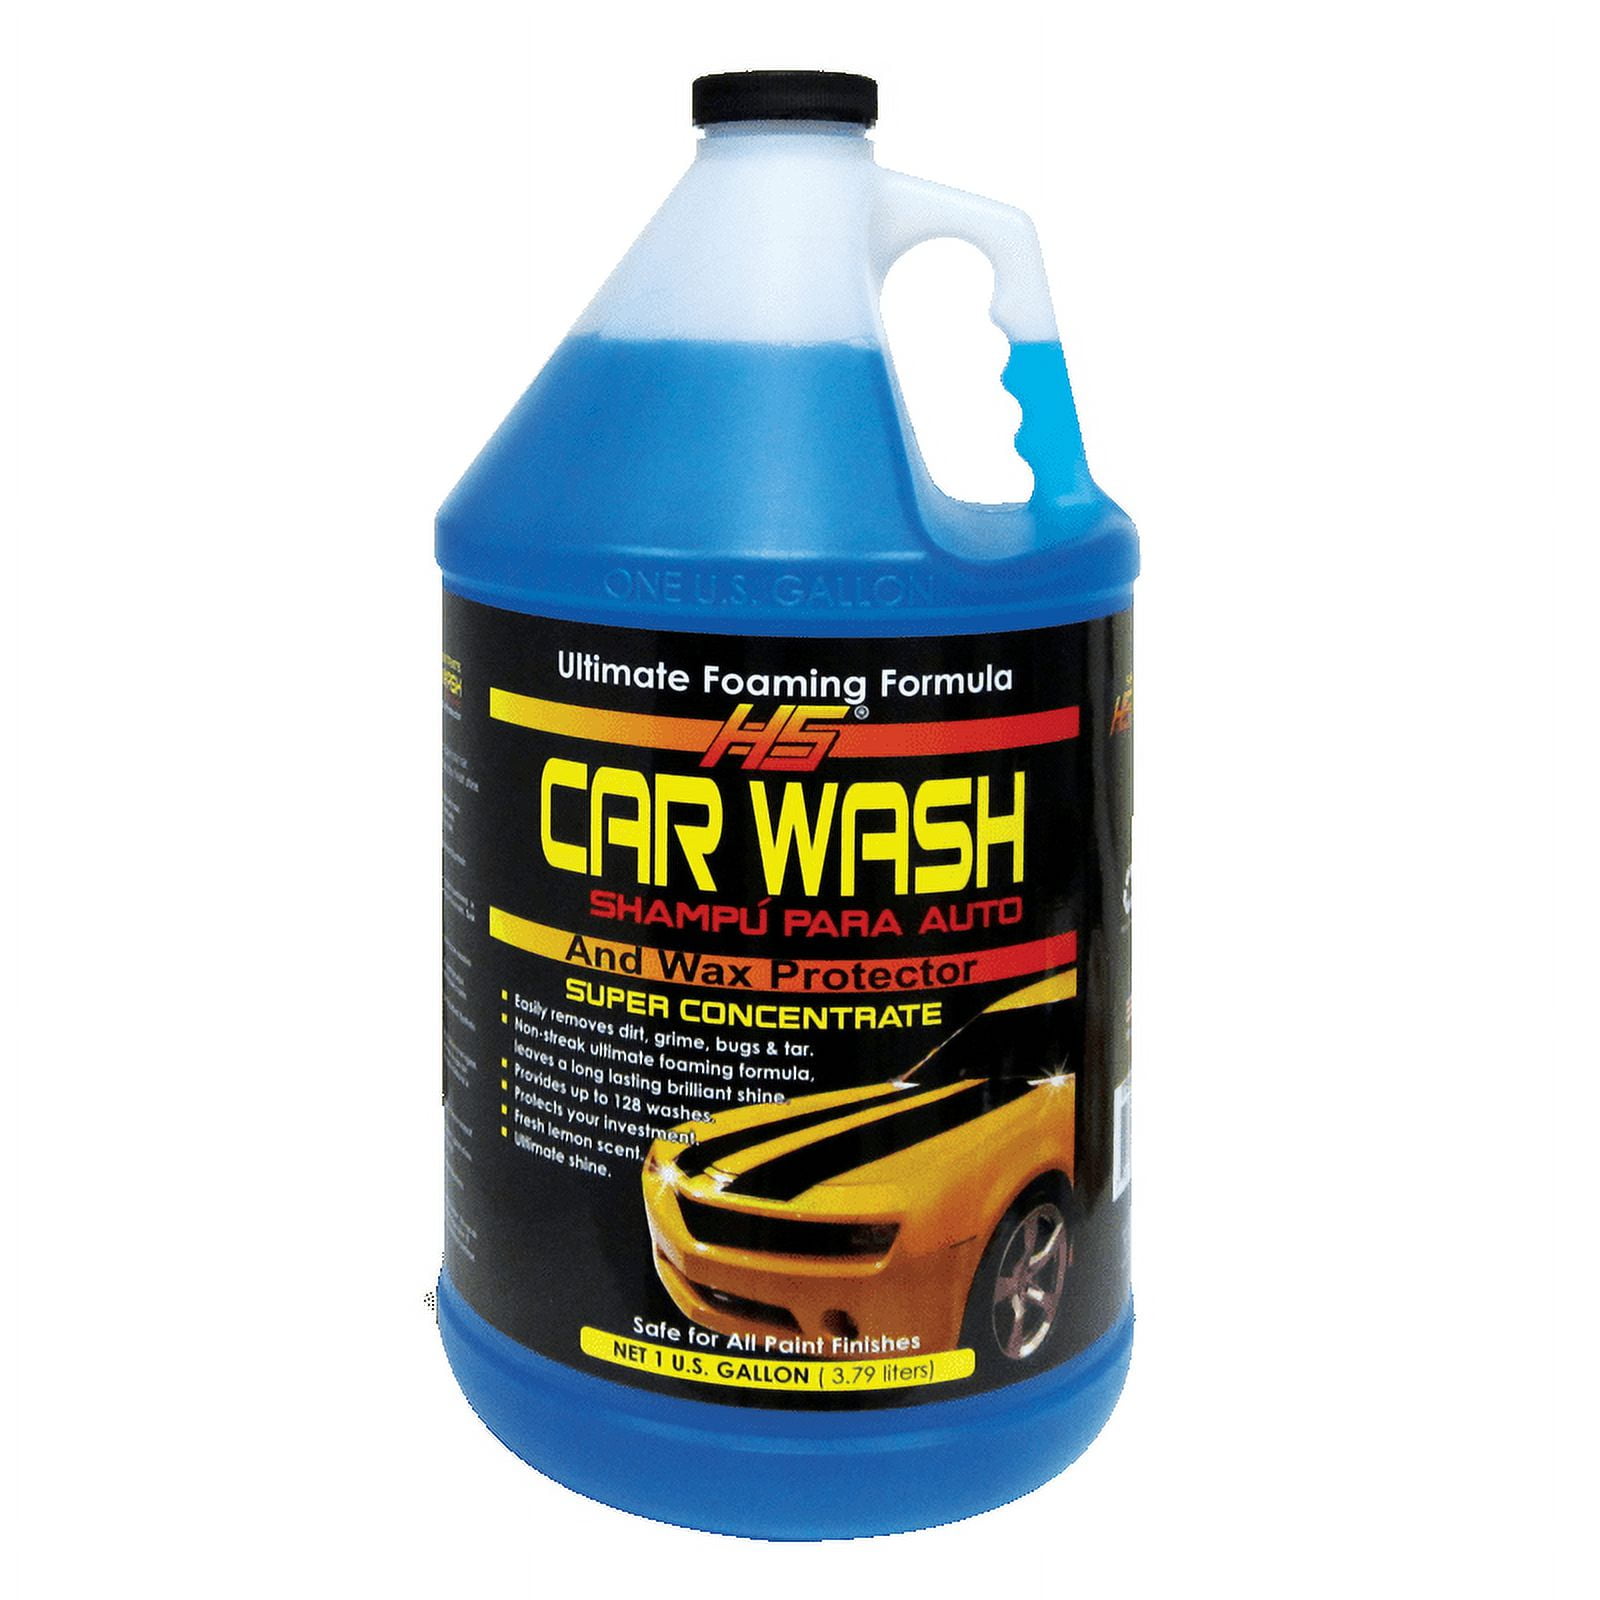 High Protection 3 In 1 Car Coating Spray 100ml Auto Nano Ceramic Coating  Polishing Spraying Wax Car Paint Scratch Repair Remover - AliExpress